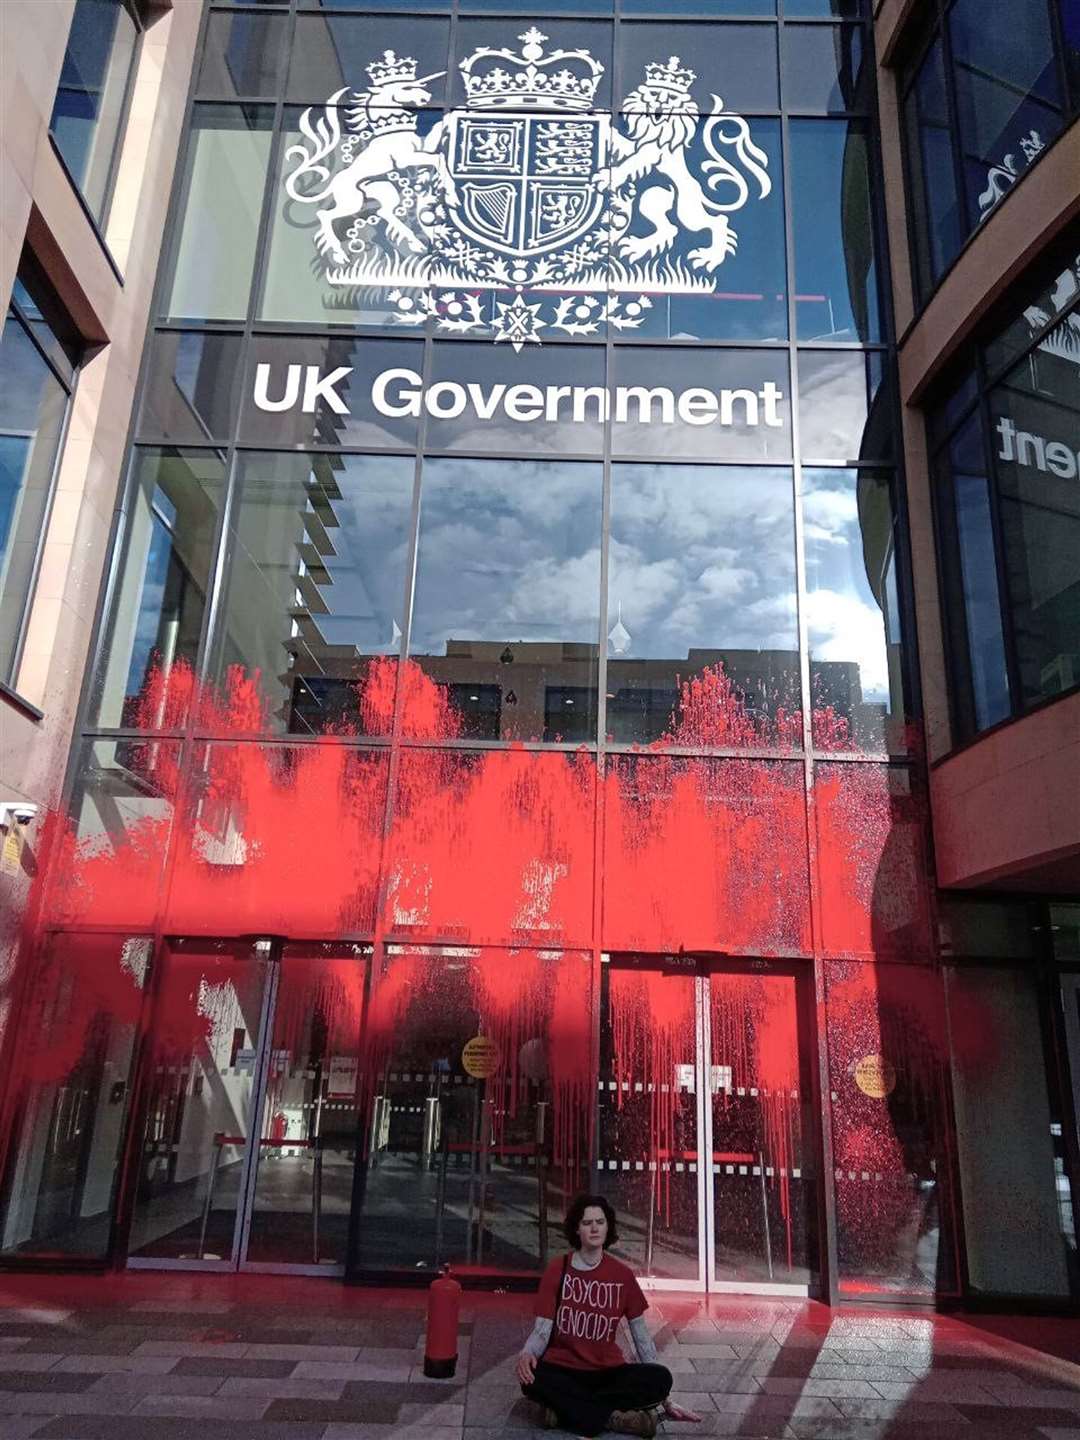 Handout photo issued by This is Rigged of Queen Elizabeth house, the UK Government offices in Edinburgh, after its campaigners sprayed red paint in protest against Israel’s military action in Gaza (This Is Rigged/PA).